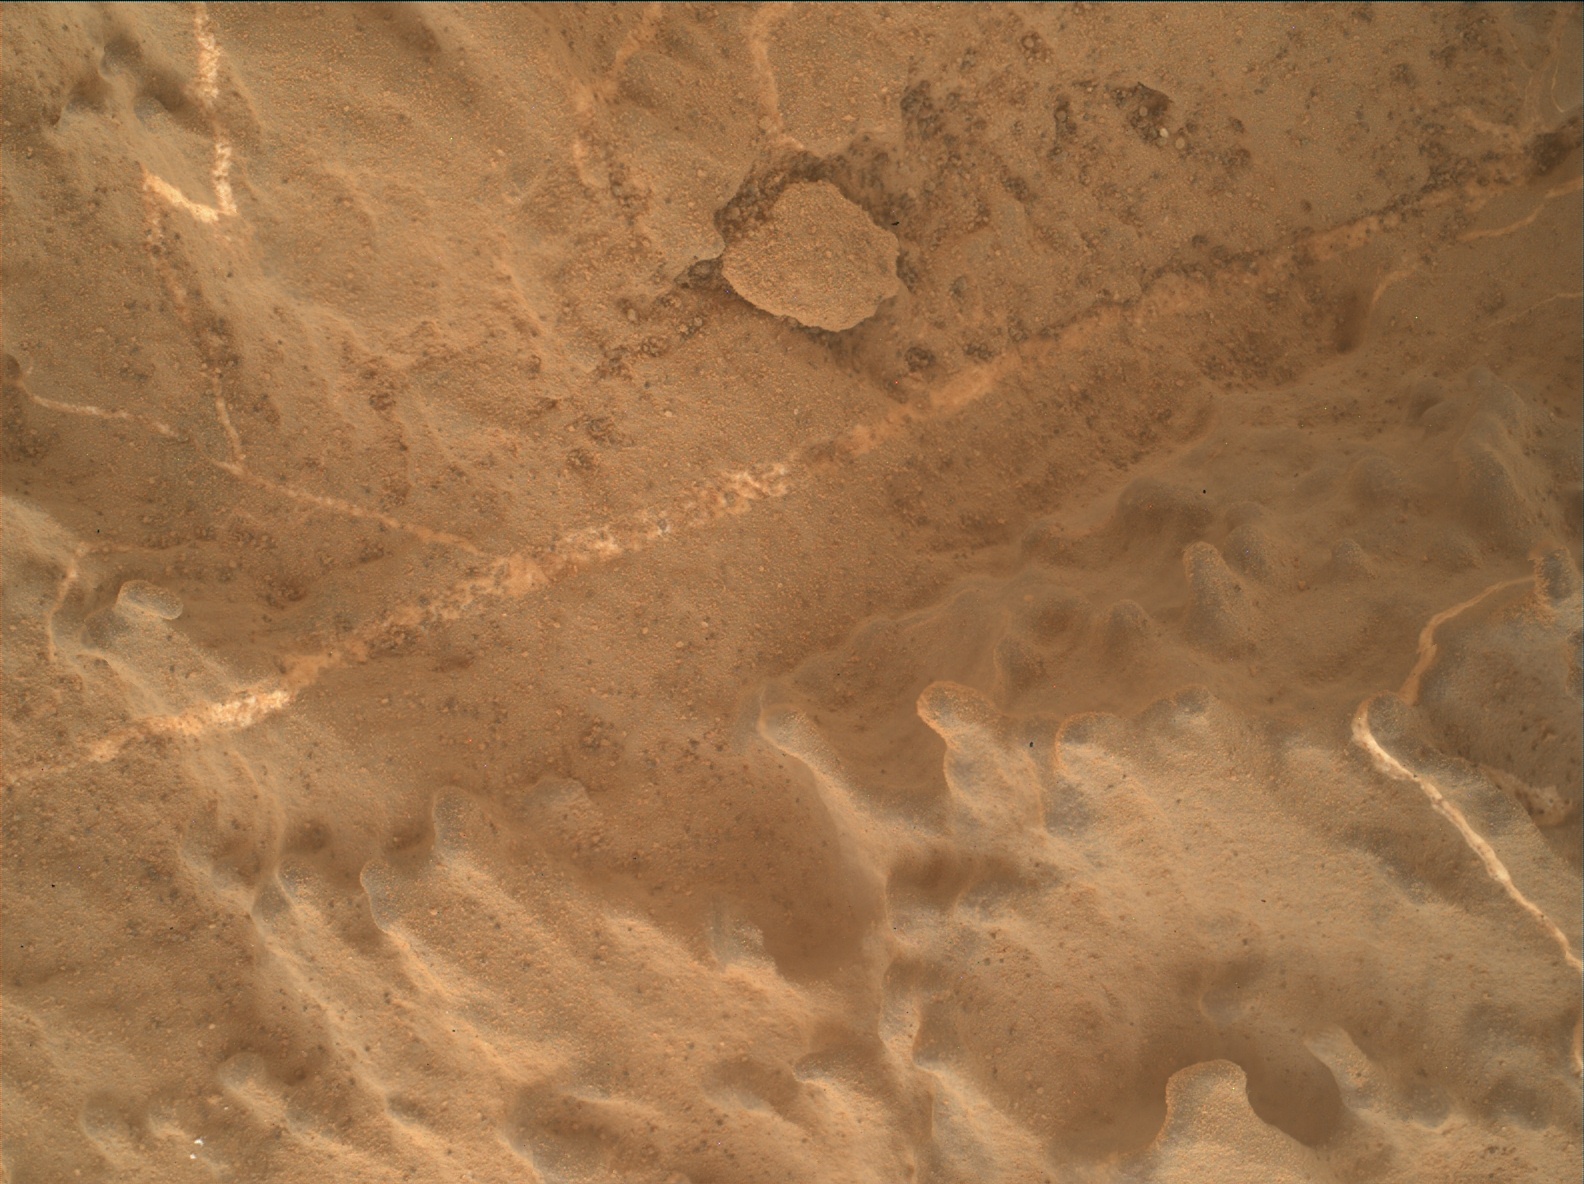 Nasa's Mars rover Curiosity acquired this image using its Mars Hand Lens Imager (MAHLI) on Sol 2613